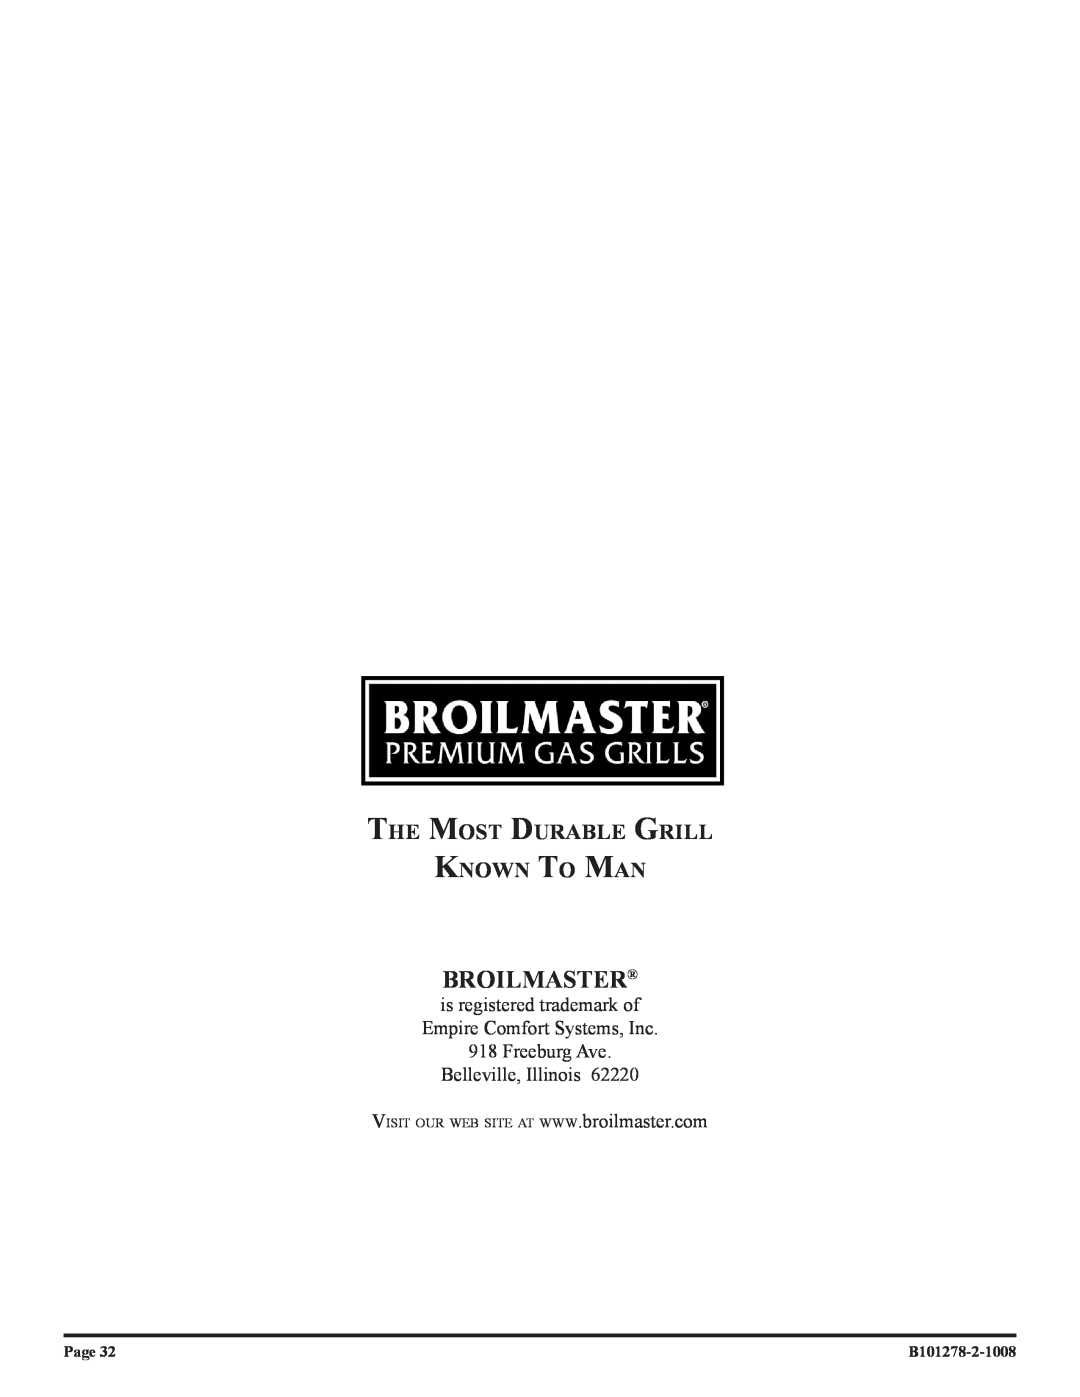 Broilmaster R3N-1, R3-1, R3BN-1, R3B-1 owner manual Broilmaster, The Most Durable Grill Known To Man, Page, B101278-2-1008 